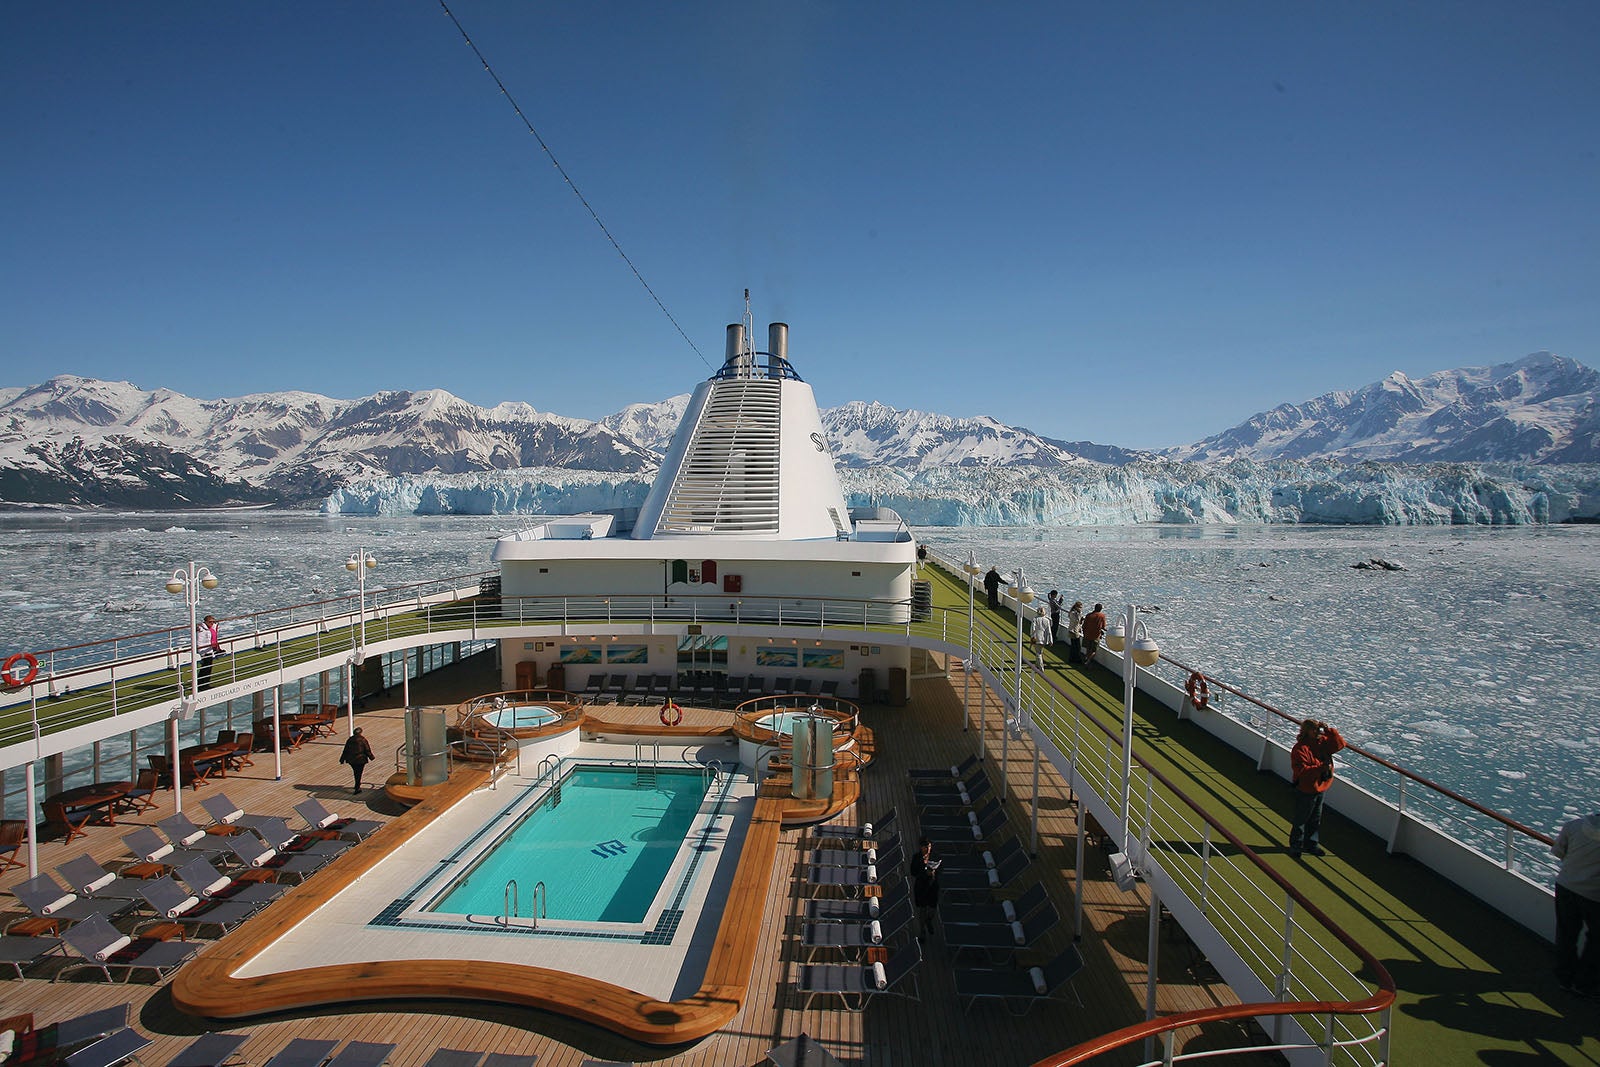 Deck of Silversea ship surrounded by glaciers and snow-covered mountains